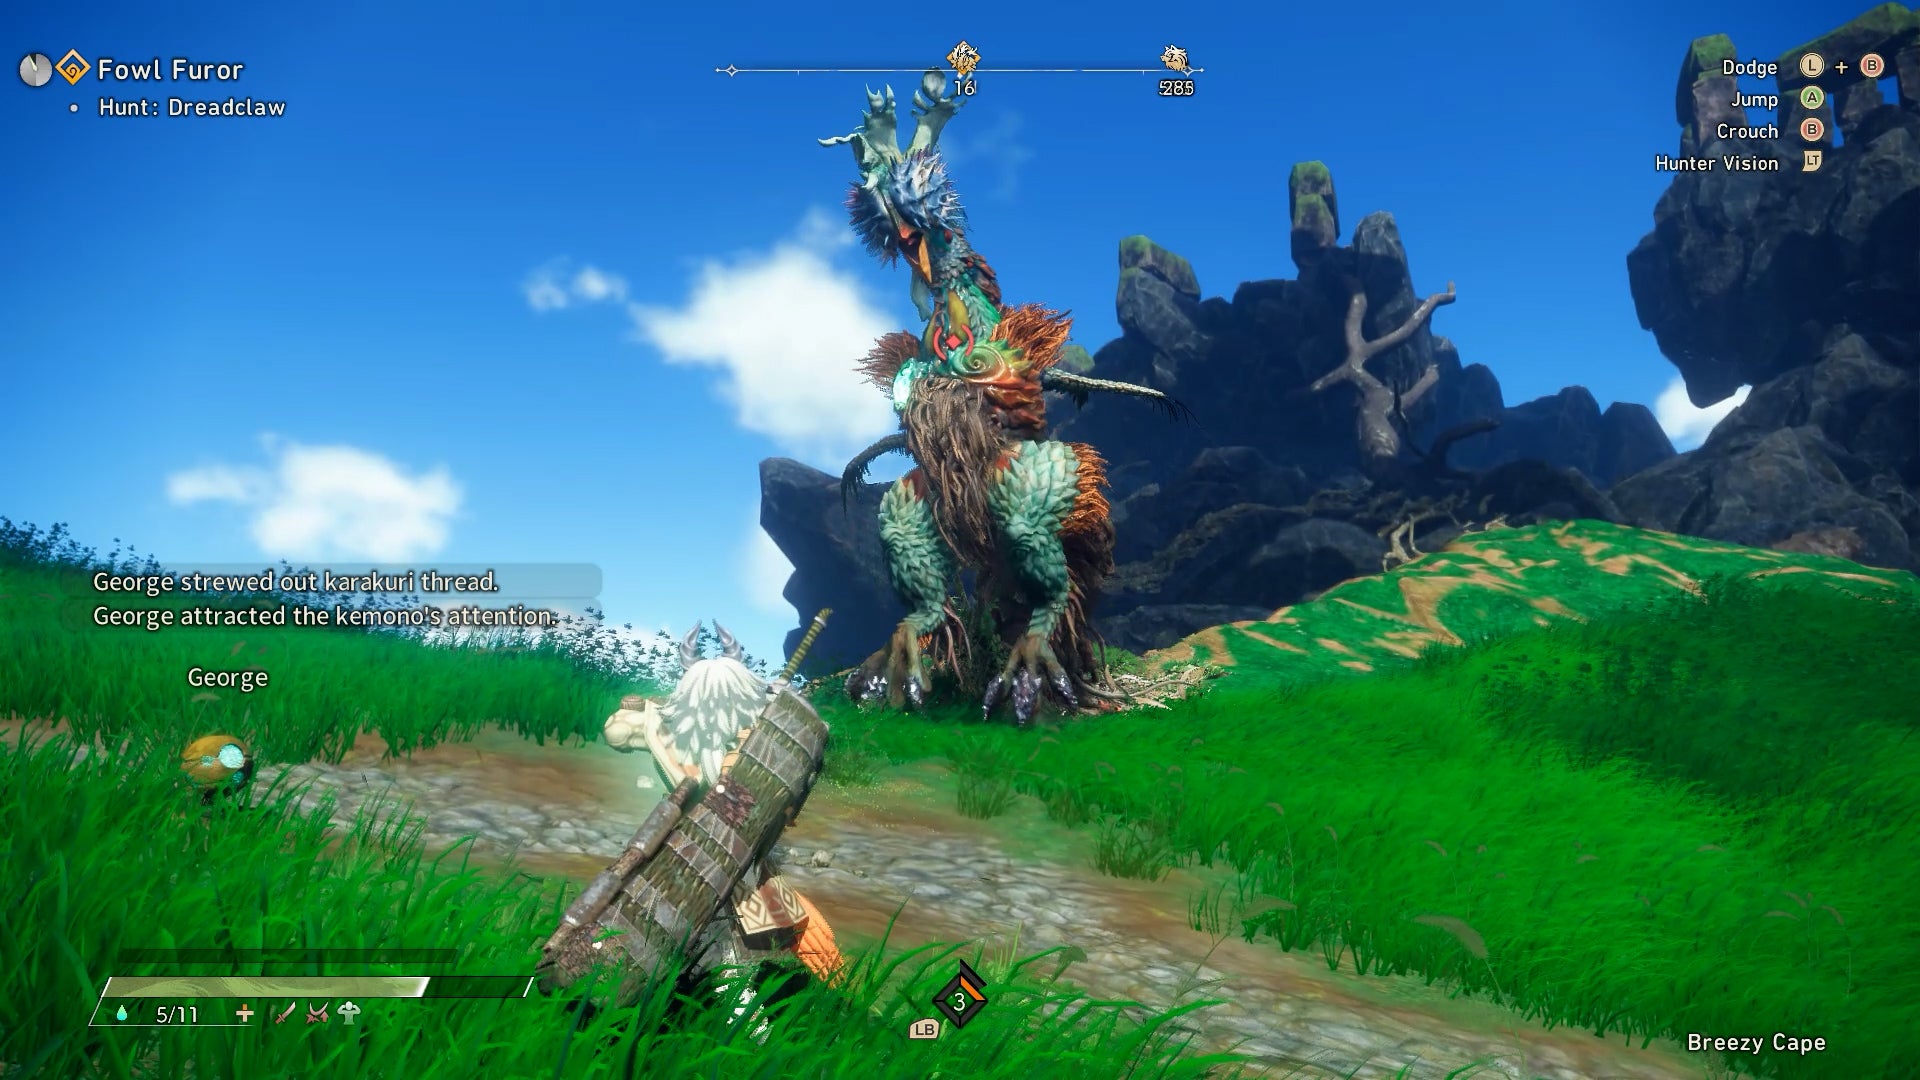 A large chicken made of bits of wood and vines jumps in the air within a lush green field.